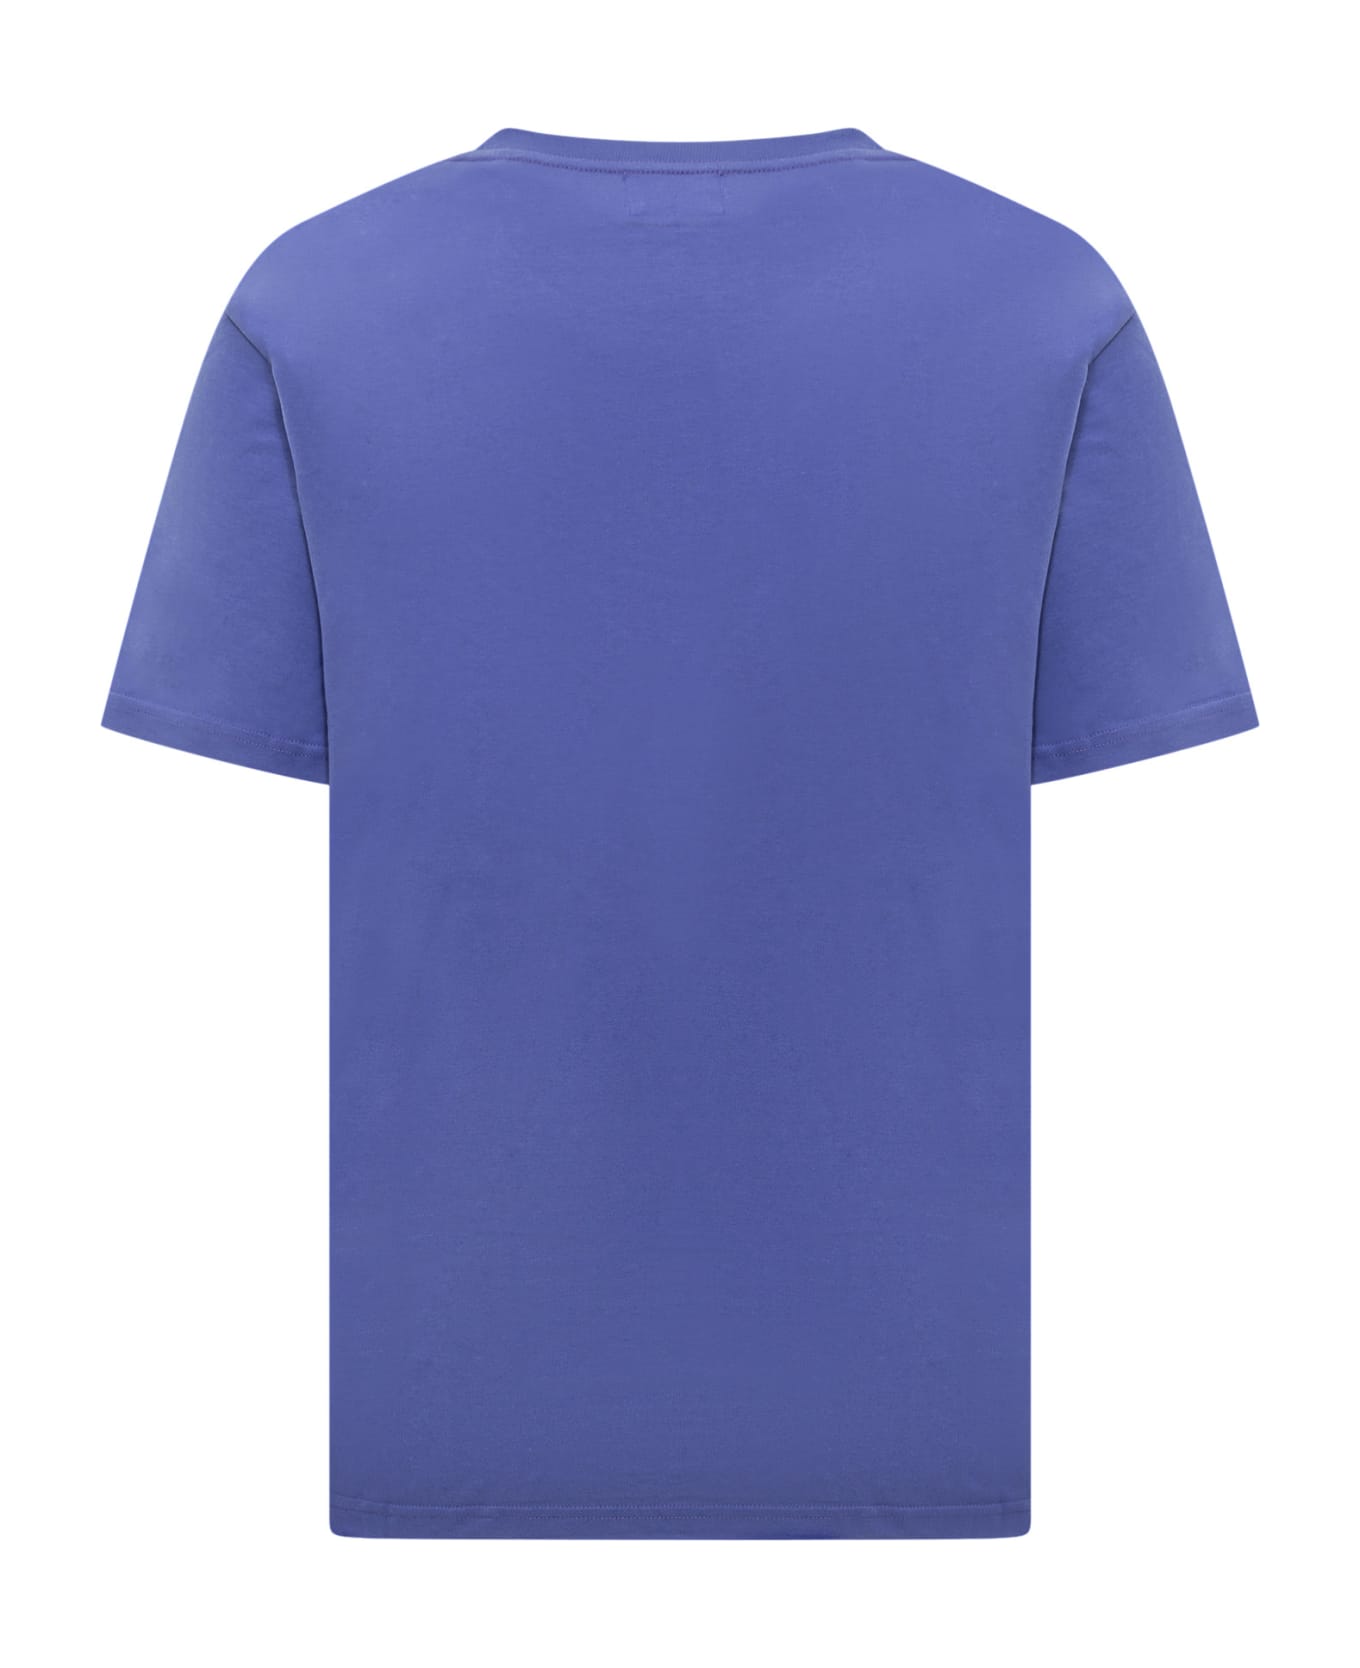 Isabel Marant Honore Cotton T-shirt - ELECTRIC BLUE